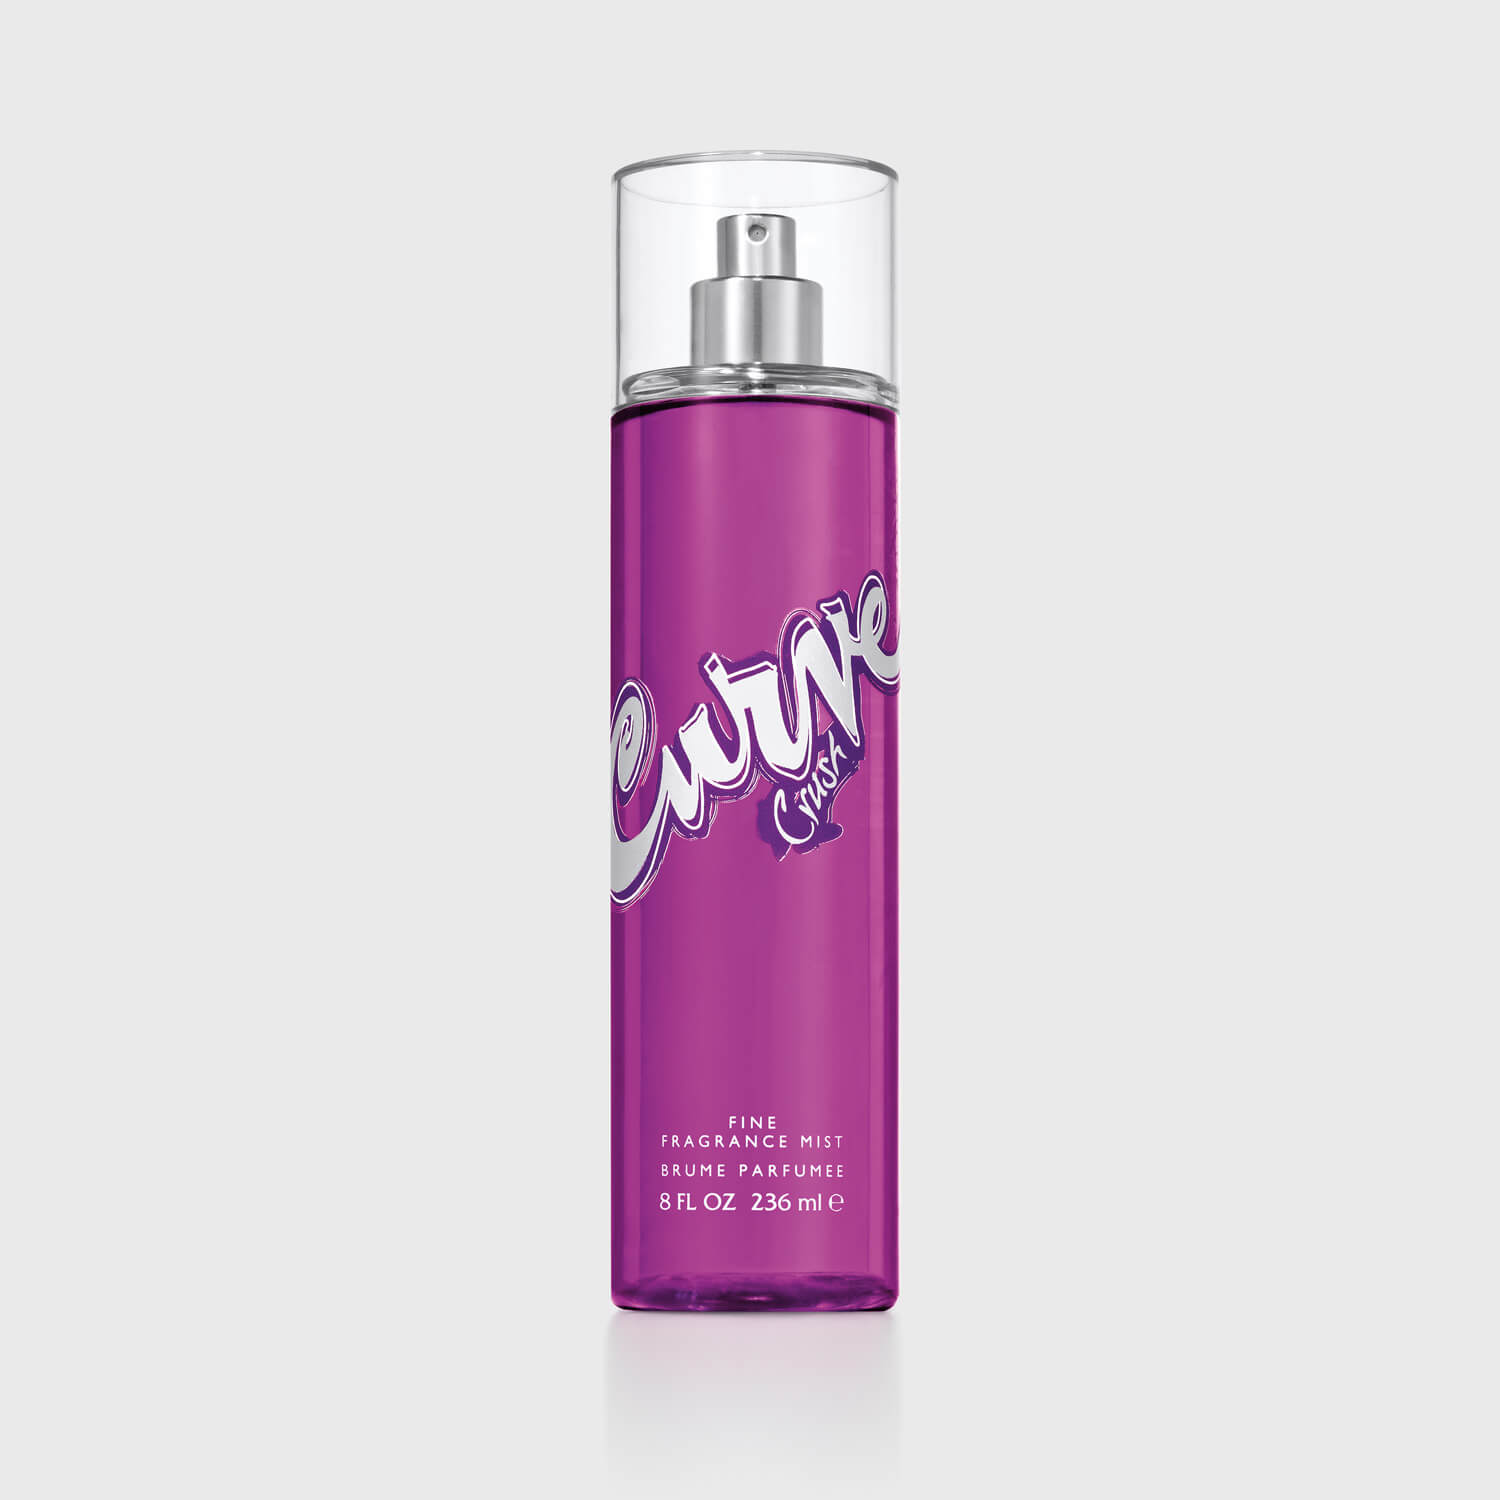 Curve Body Mists for Women - Official site of Curve for Women